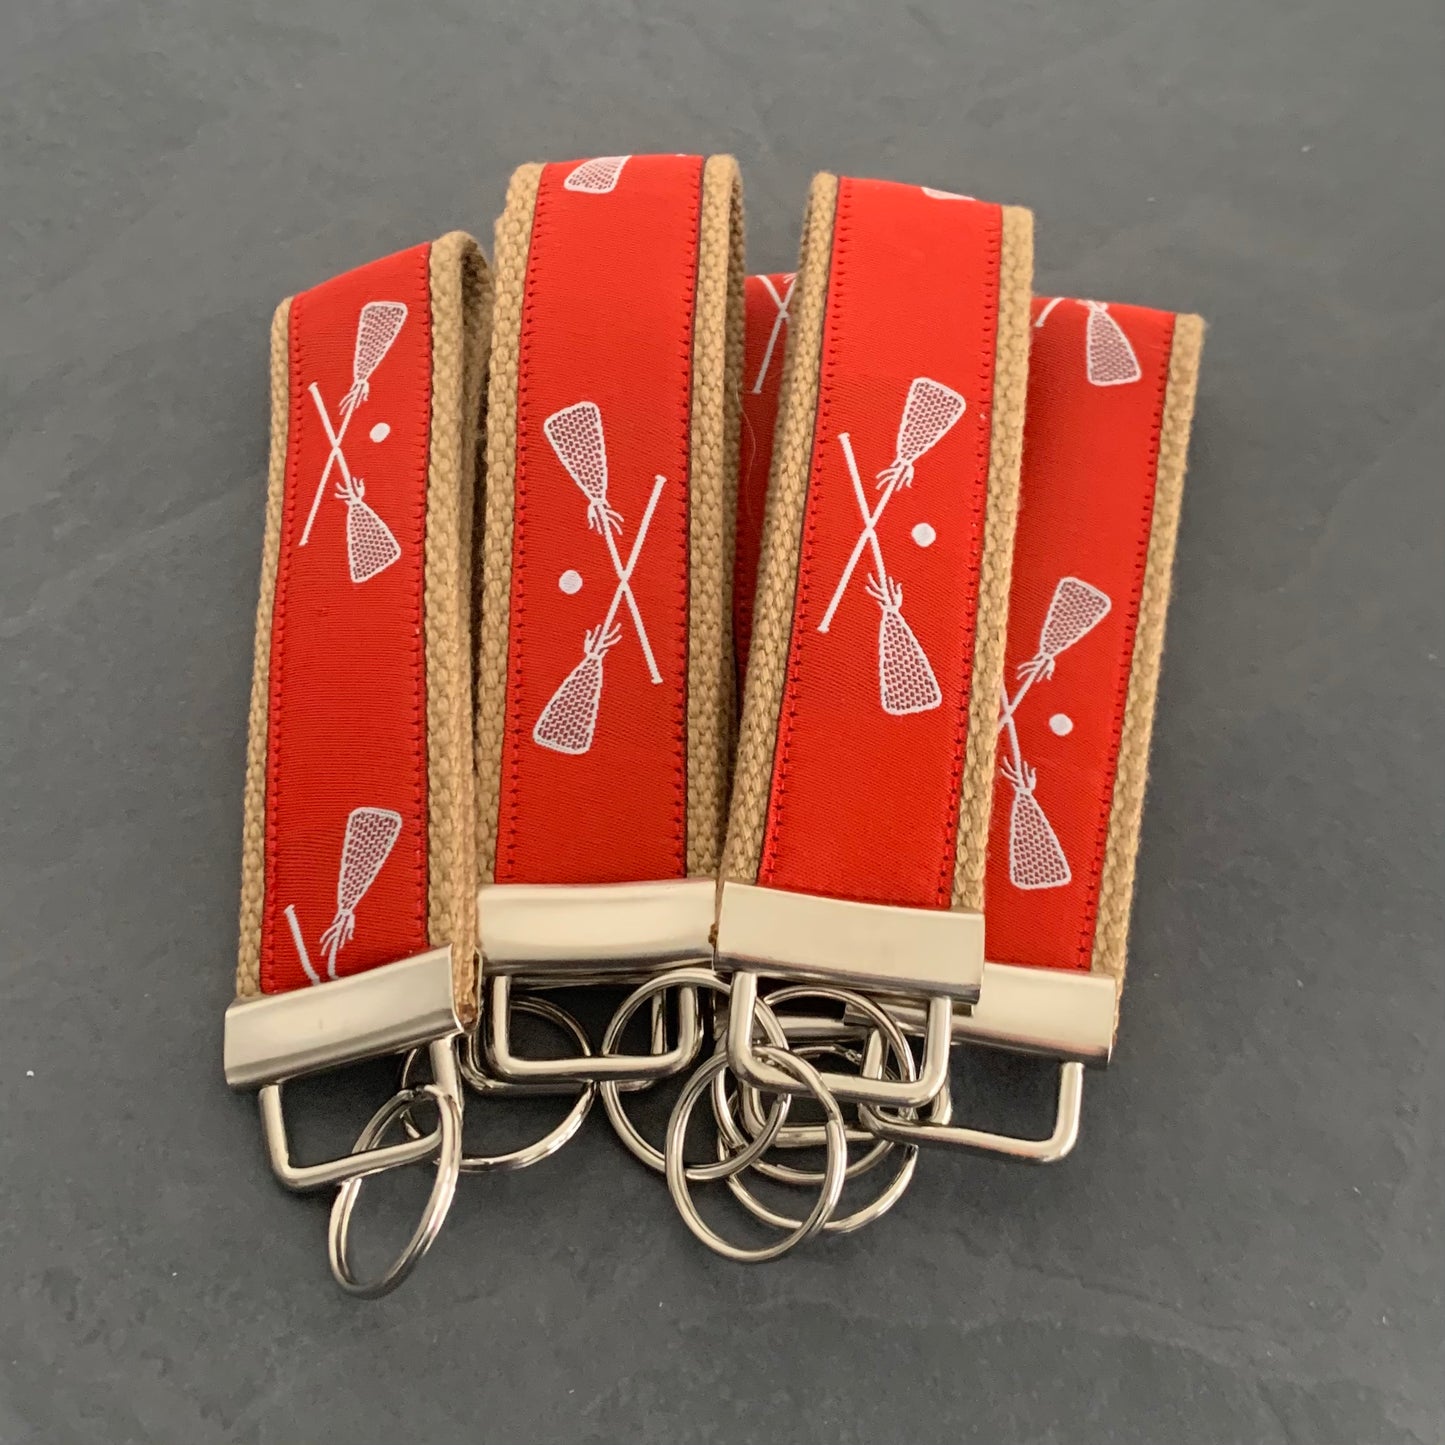 Khaki and Red Lax